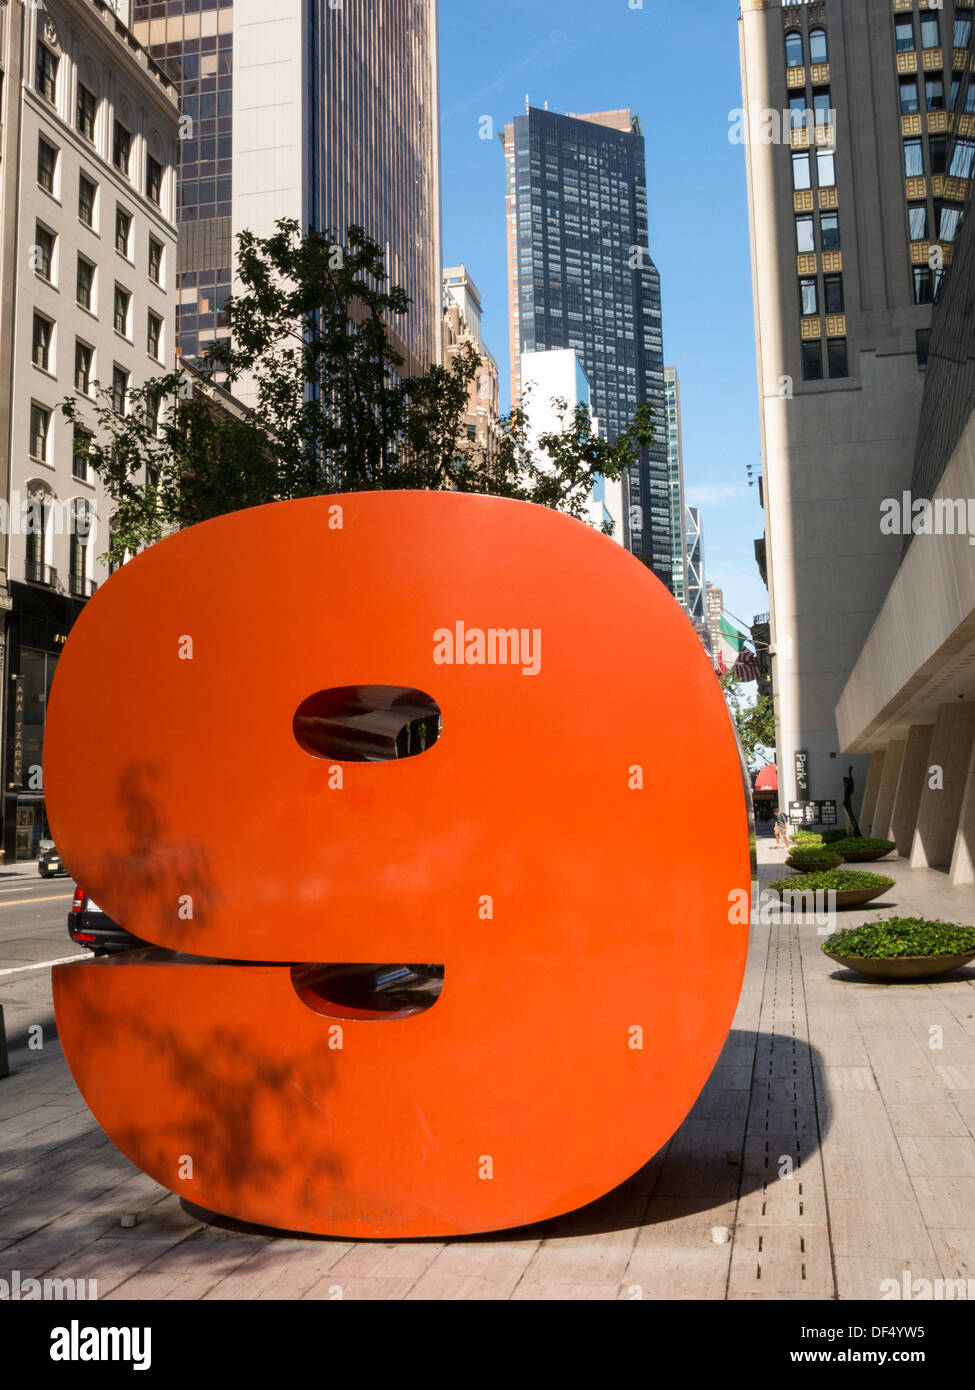 Nine West 57th Street High Resolution Stock Photography and Images - Alamy